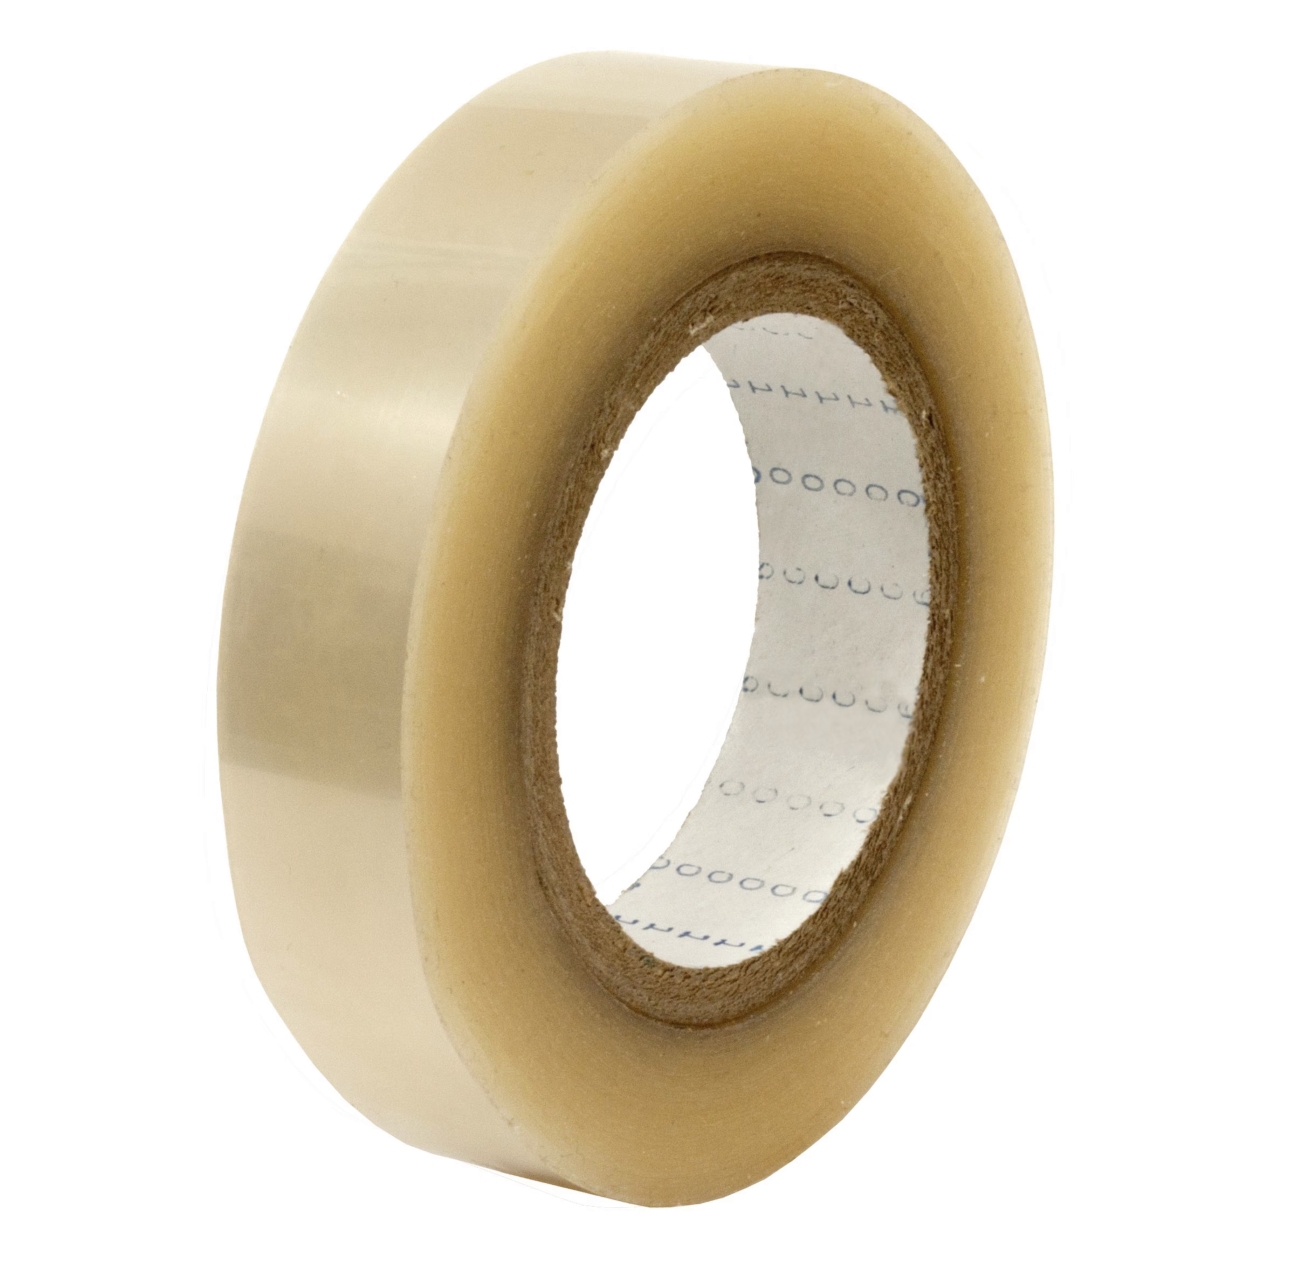 S-K-S dubbelzijdige kleefband met polyester drager 960, transparant, 50 mm x 66 m, siliconen kleefband, 0,085 mm